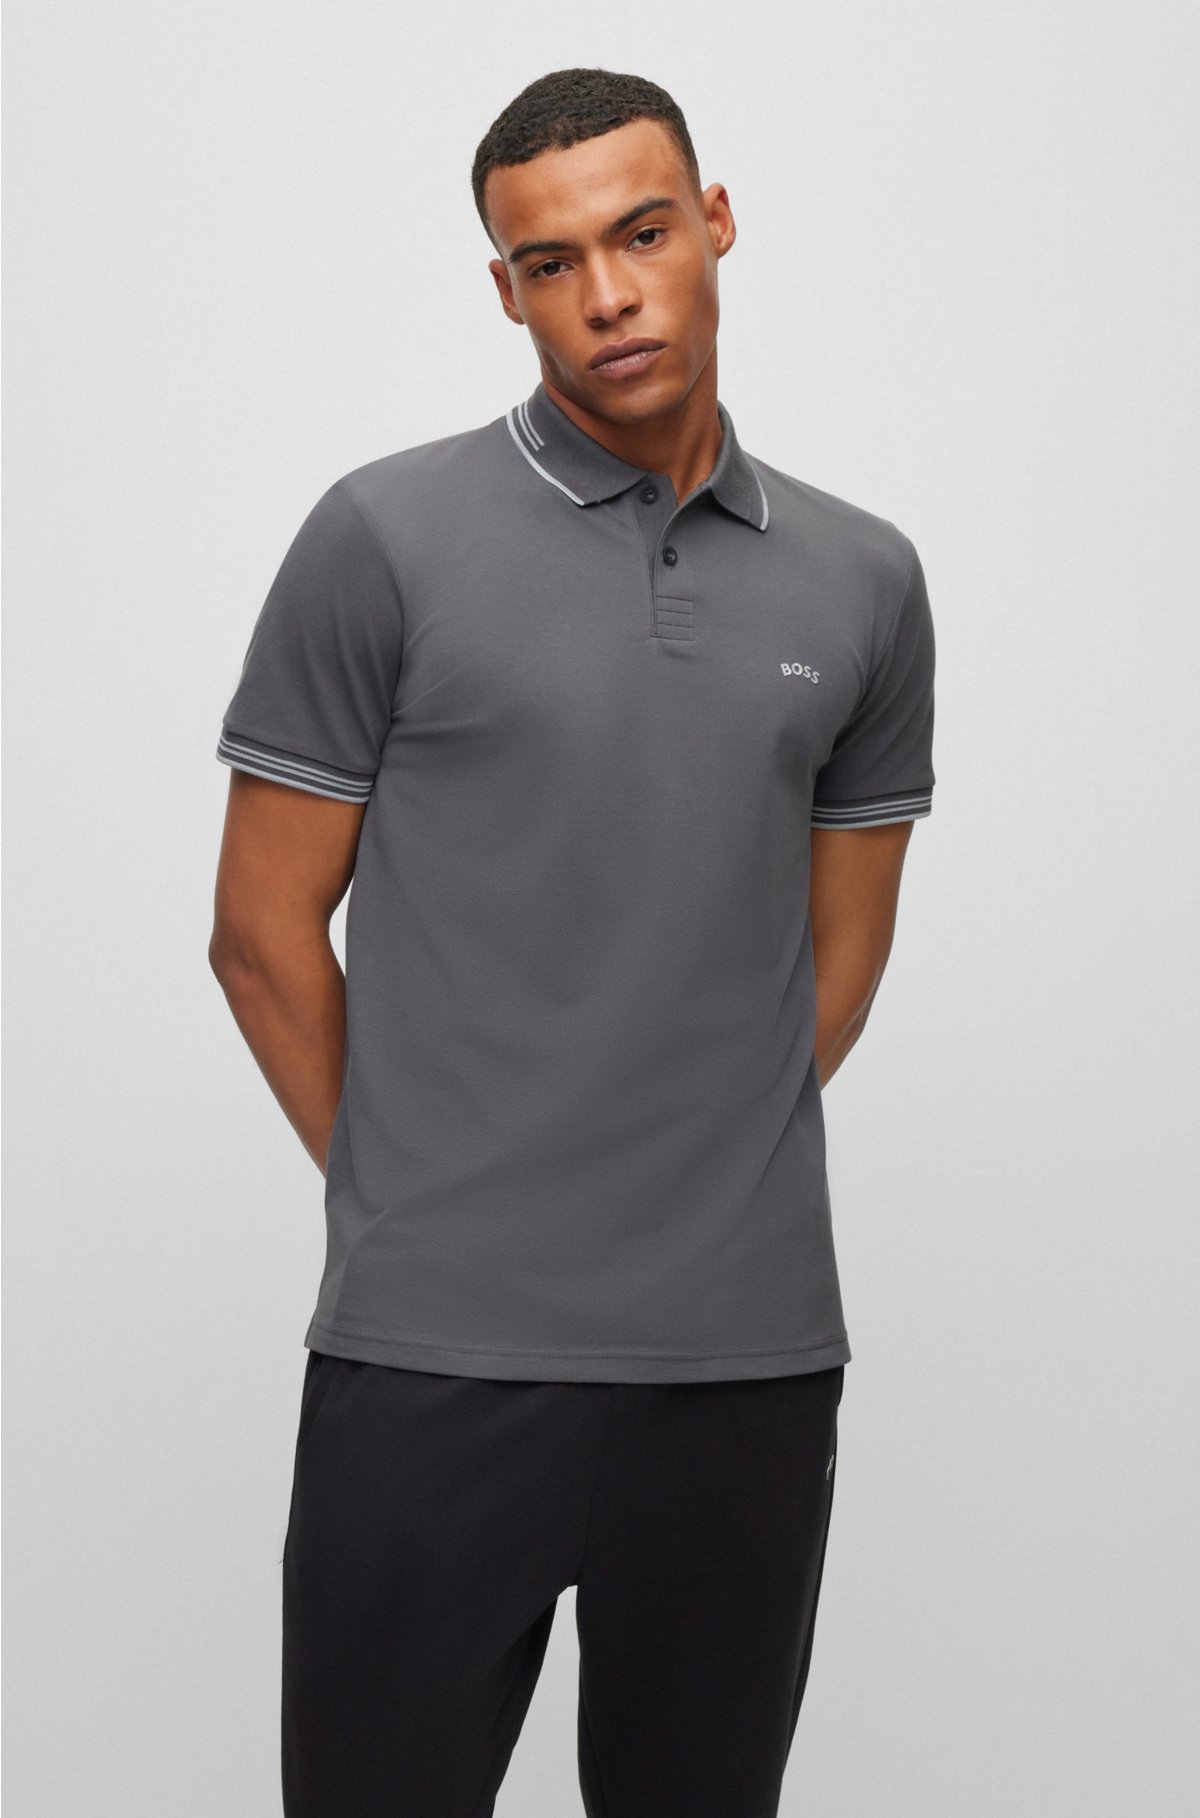 BOSS - Curved-logo slim-fit polo shirt in stretch-cotton piqué